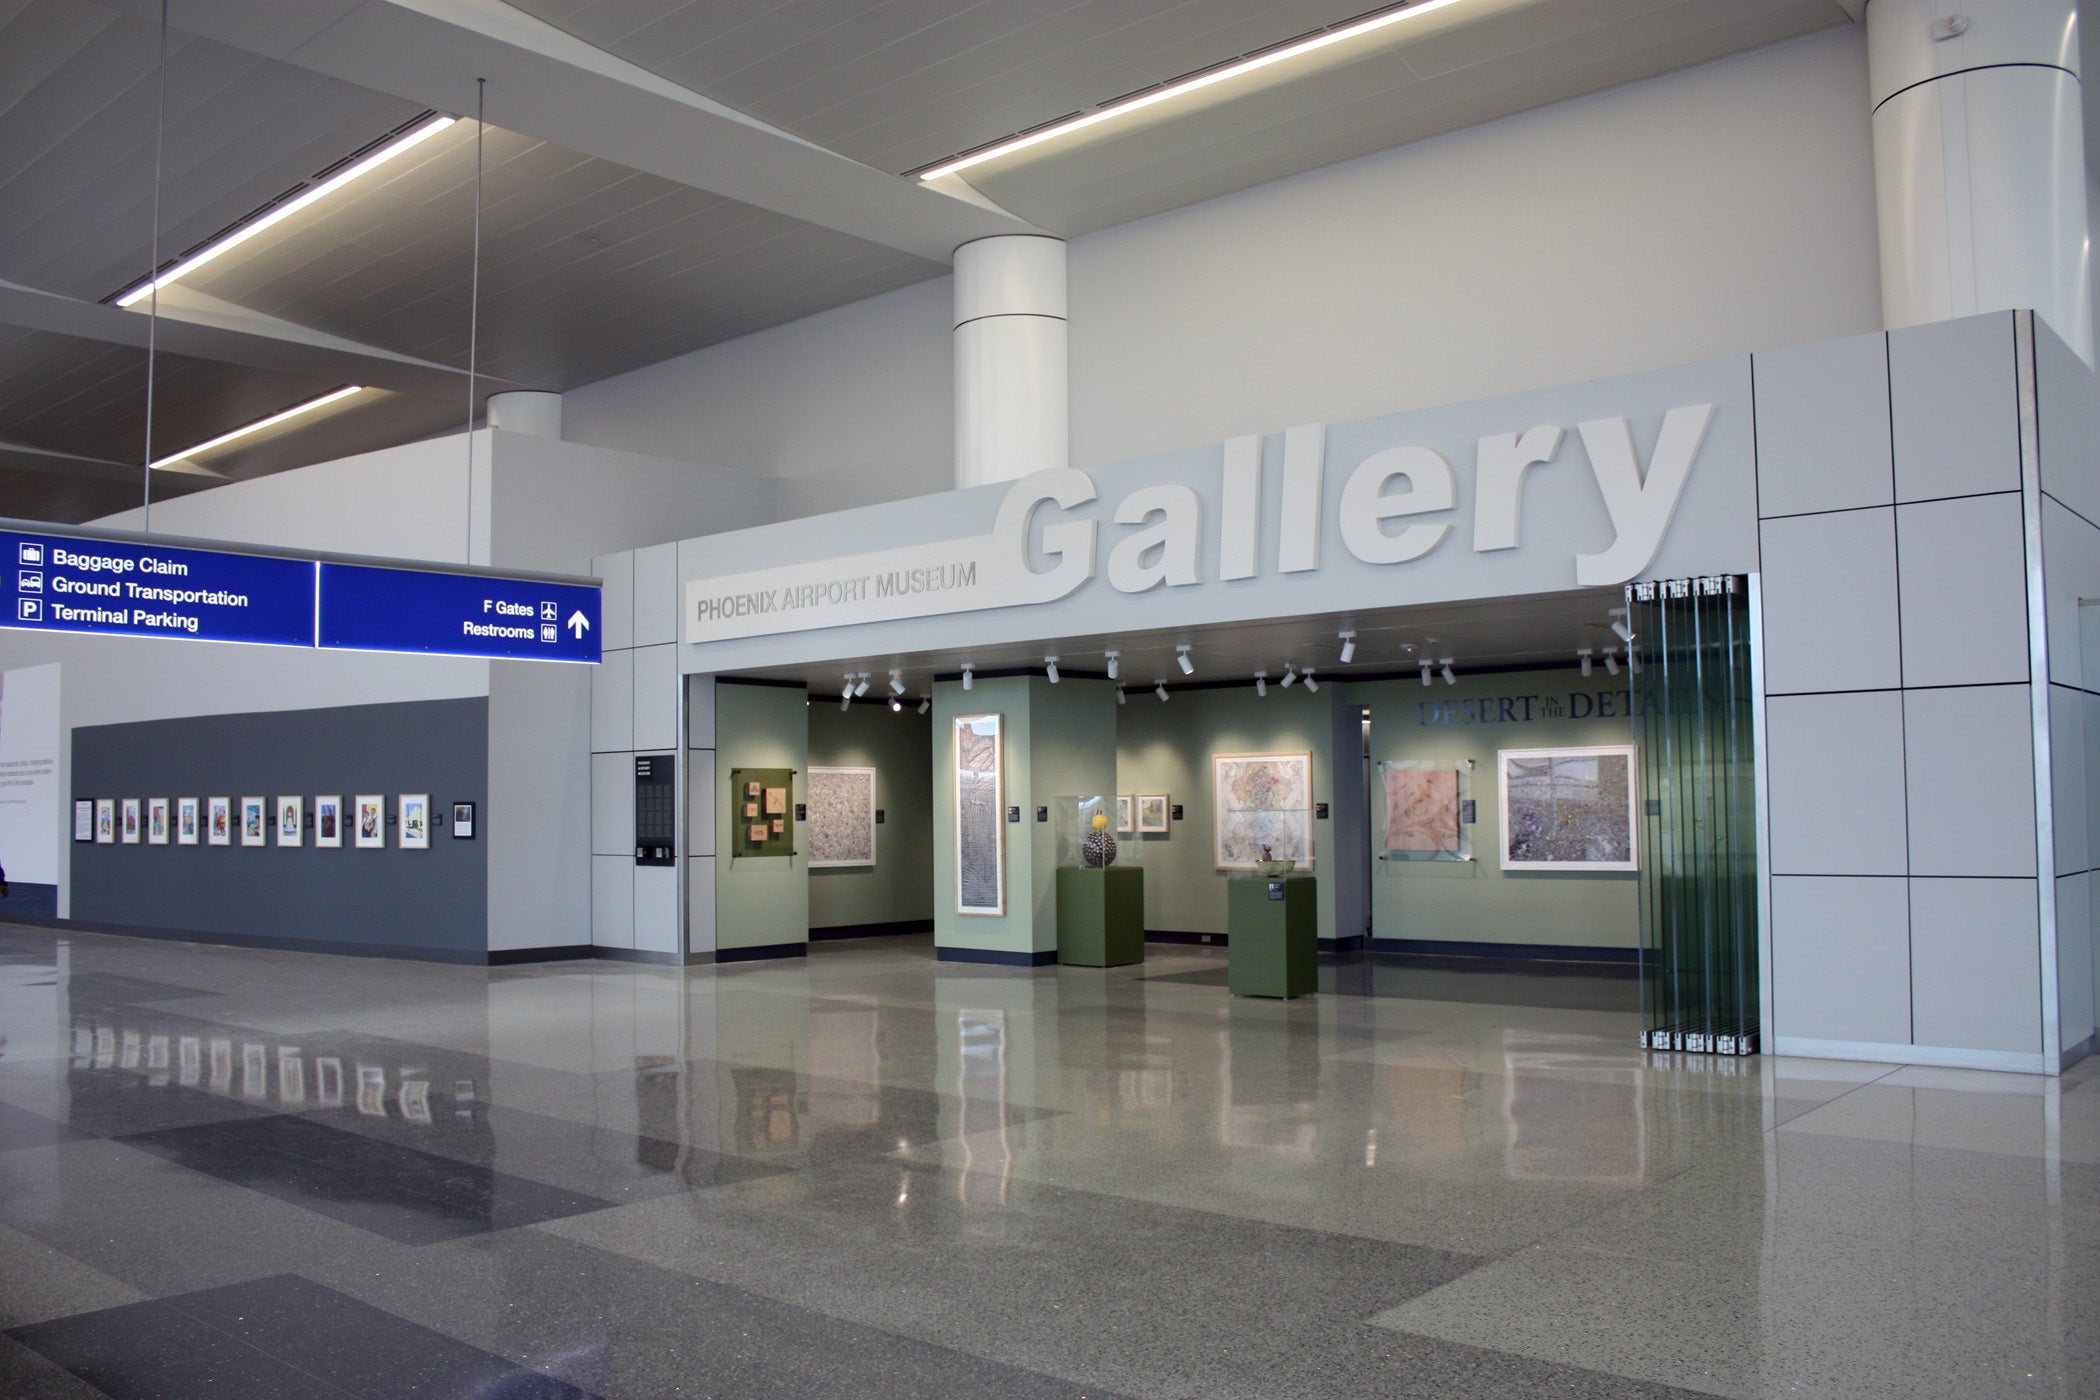 Museum and gallery at Phoenix Sky Harbor